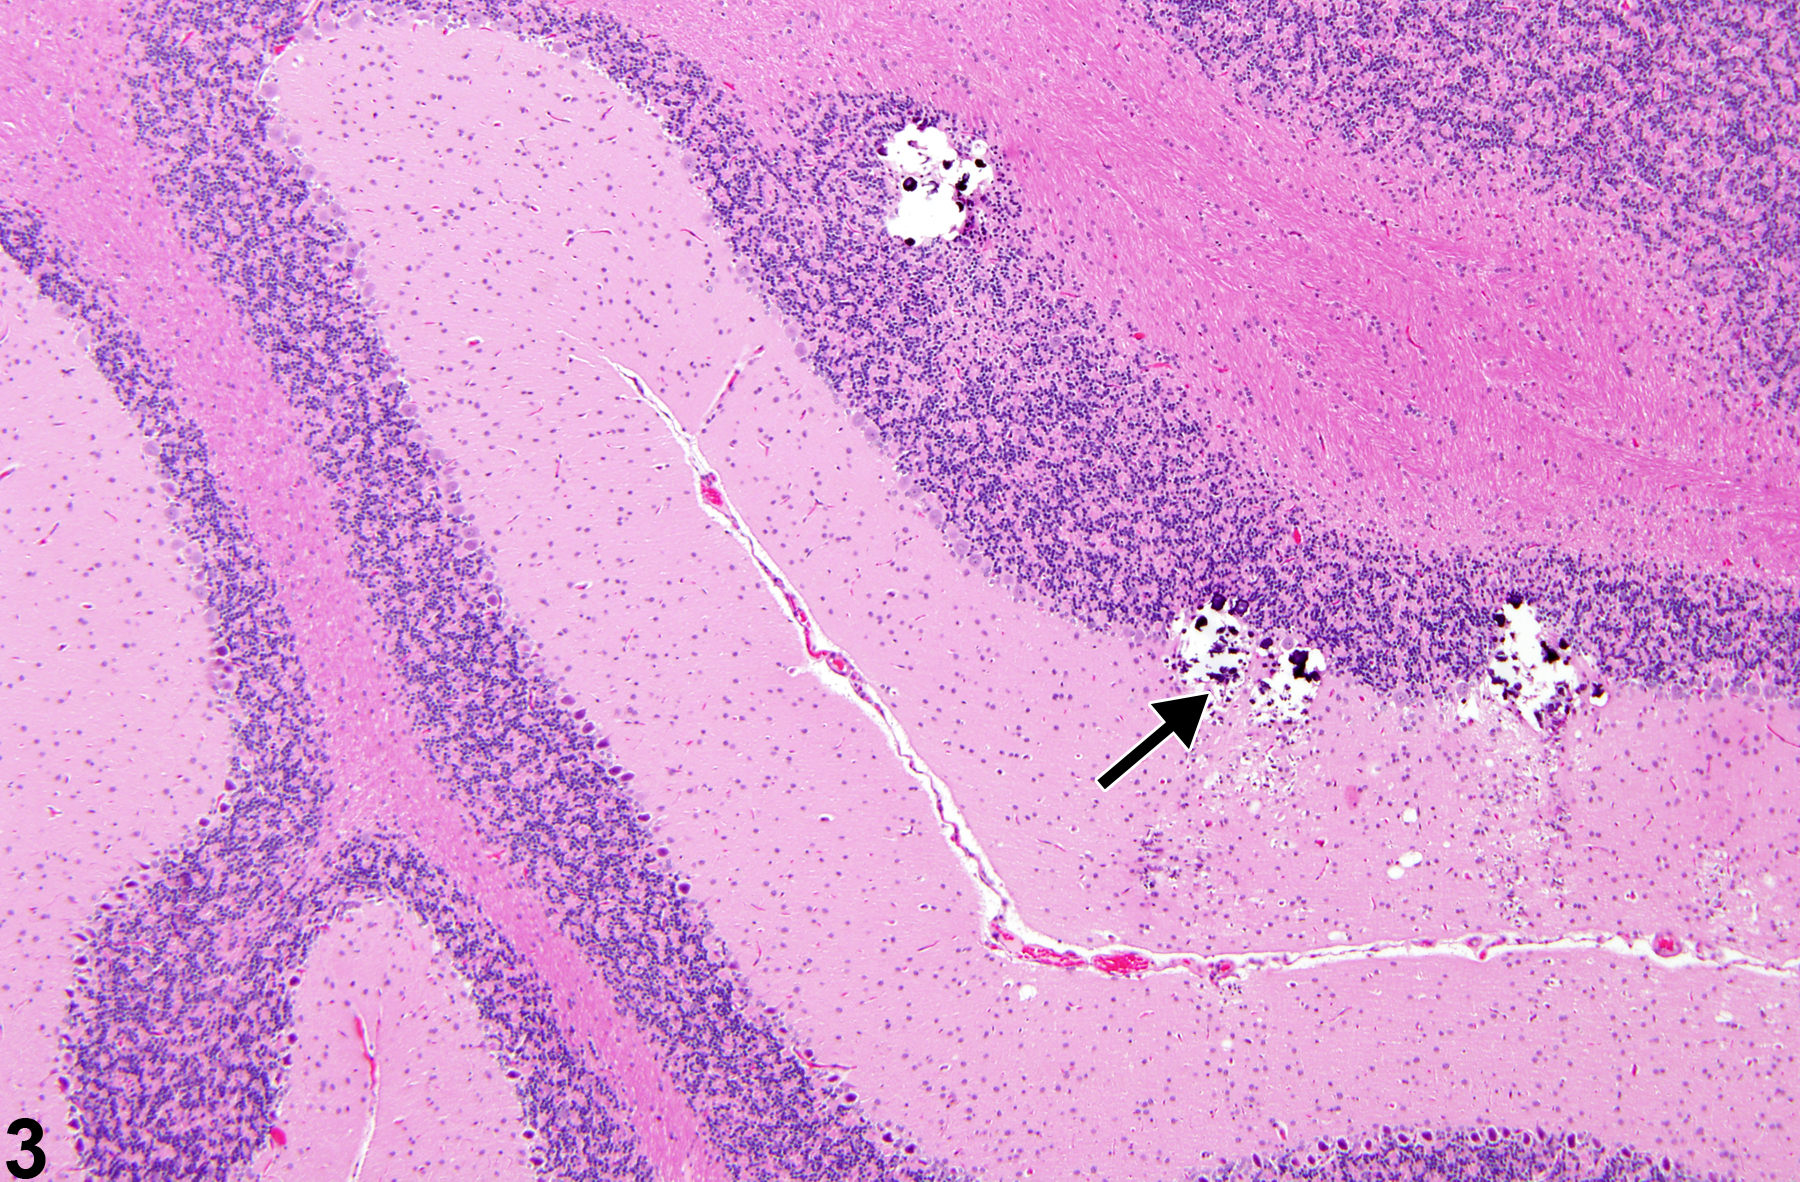 Image of mineralization in the brain from a male F344/N rat in a subchronic study